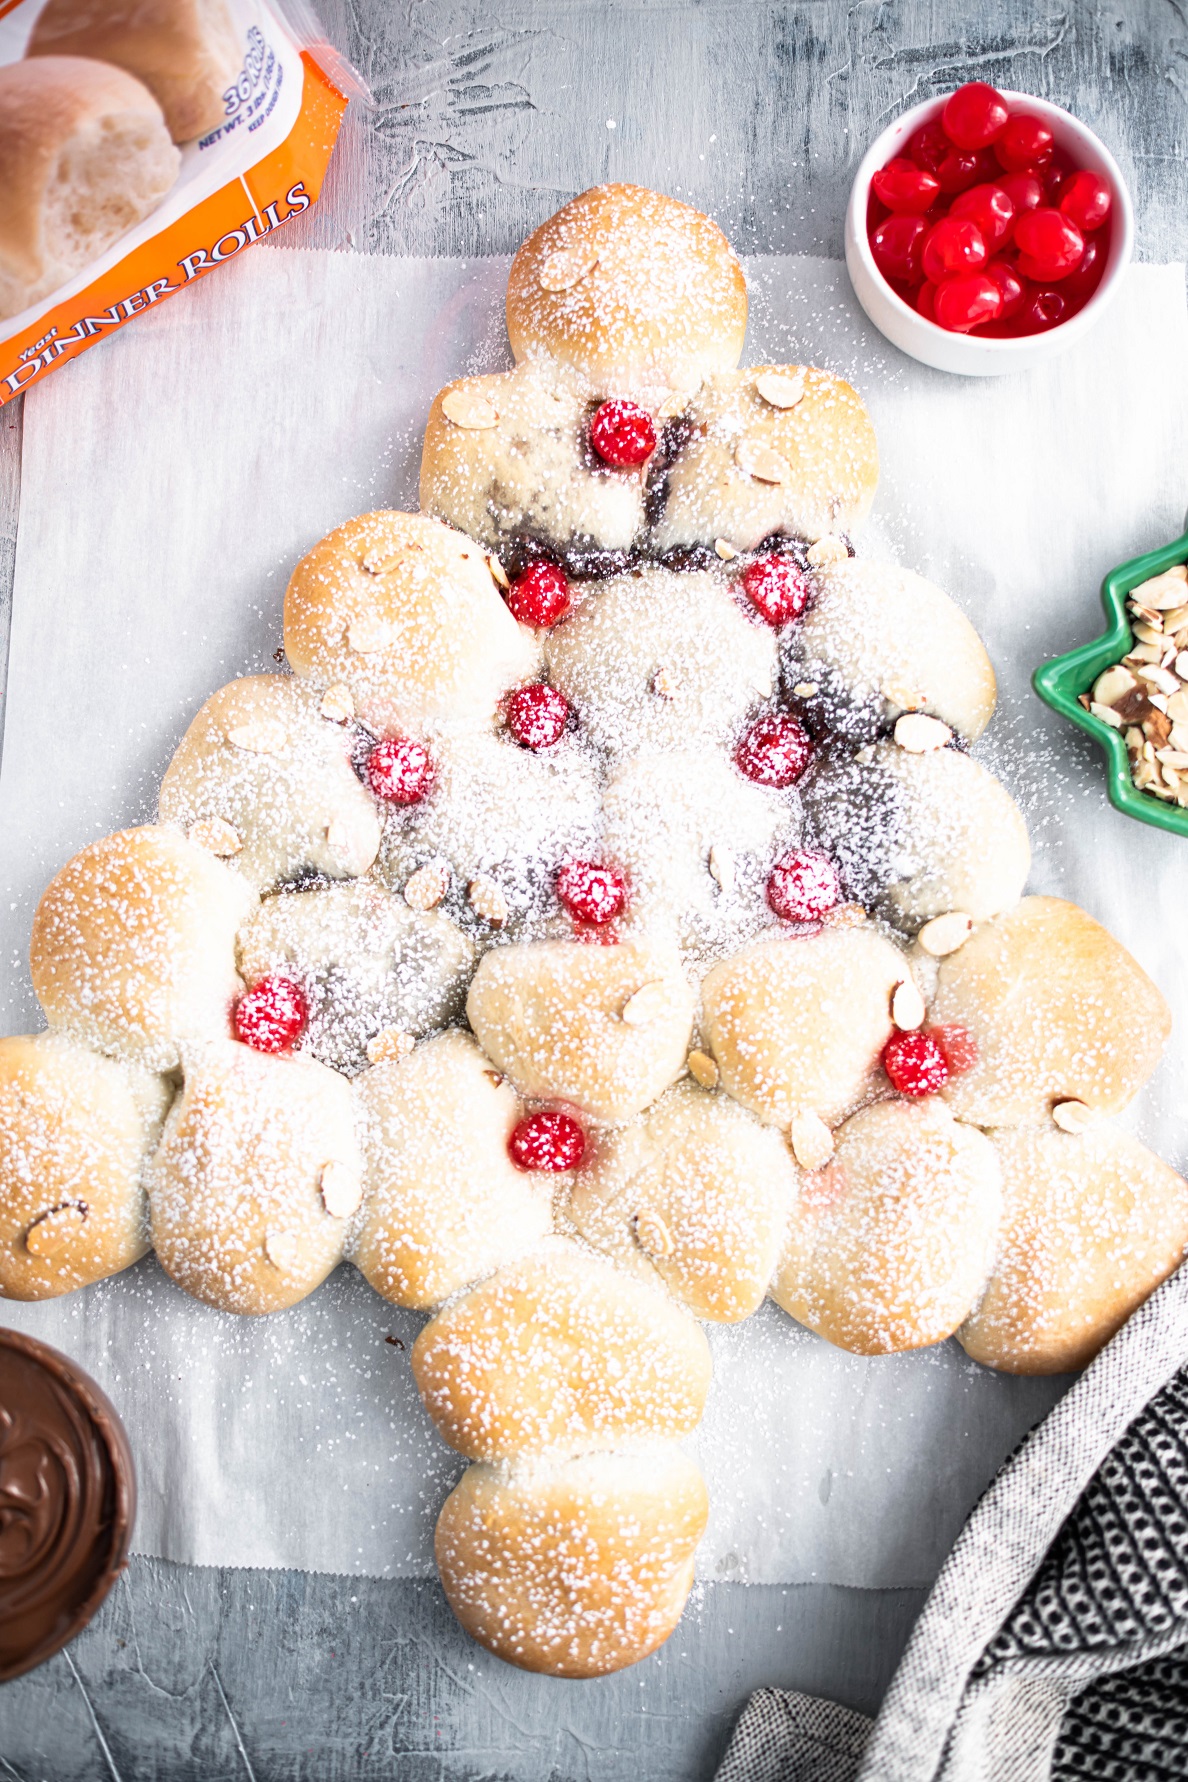 You'll be the hit of the party when you arrive with this gorgeous Christmas Tree Bread featuring Rhodes bread dough and creamy chocolate hazelnut spread. Easy to make and sure to impress!